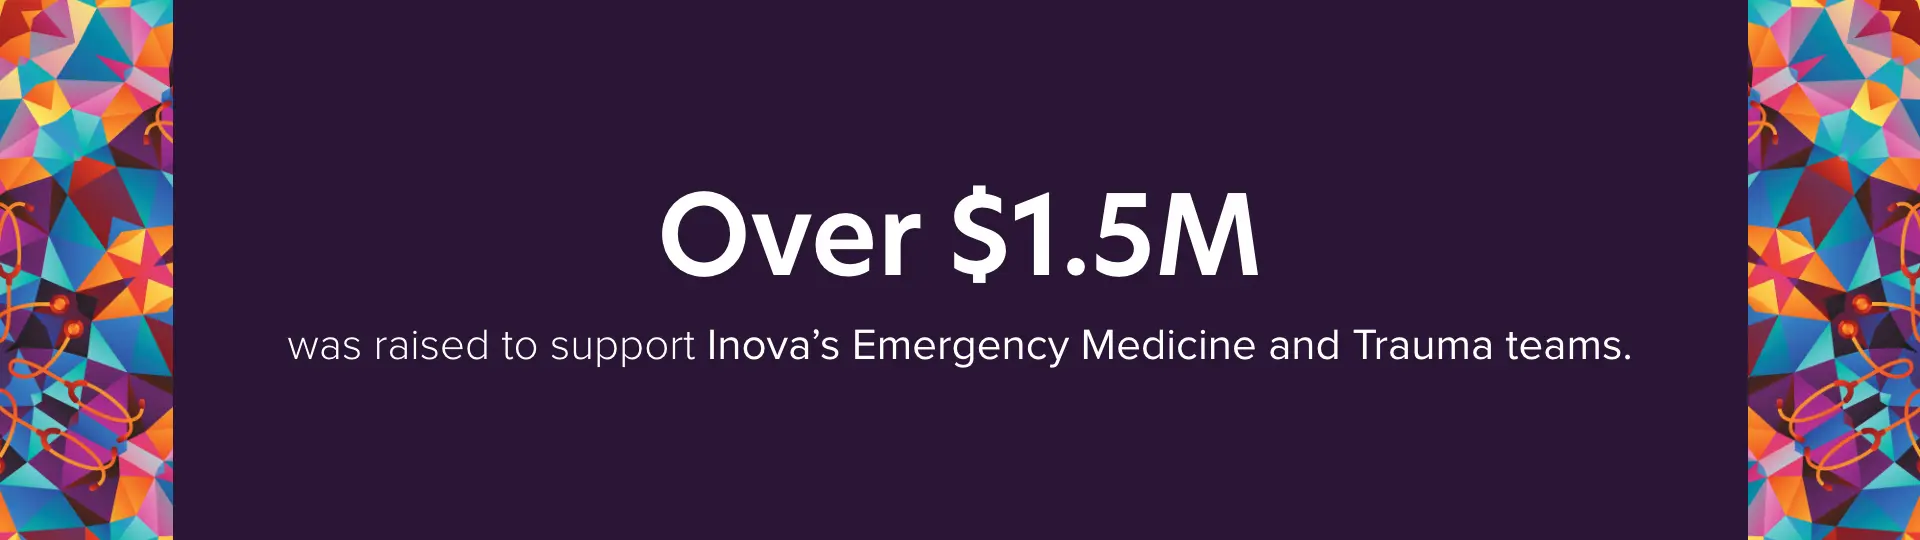 Over $1.5 million was raised to support Inova's Emergency Medicine and Trauma teams.